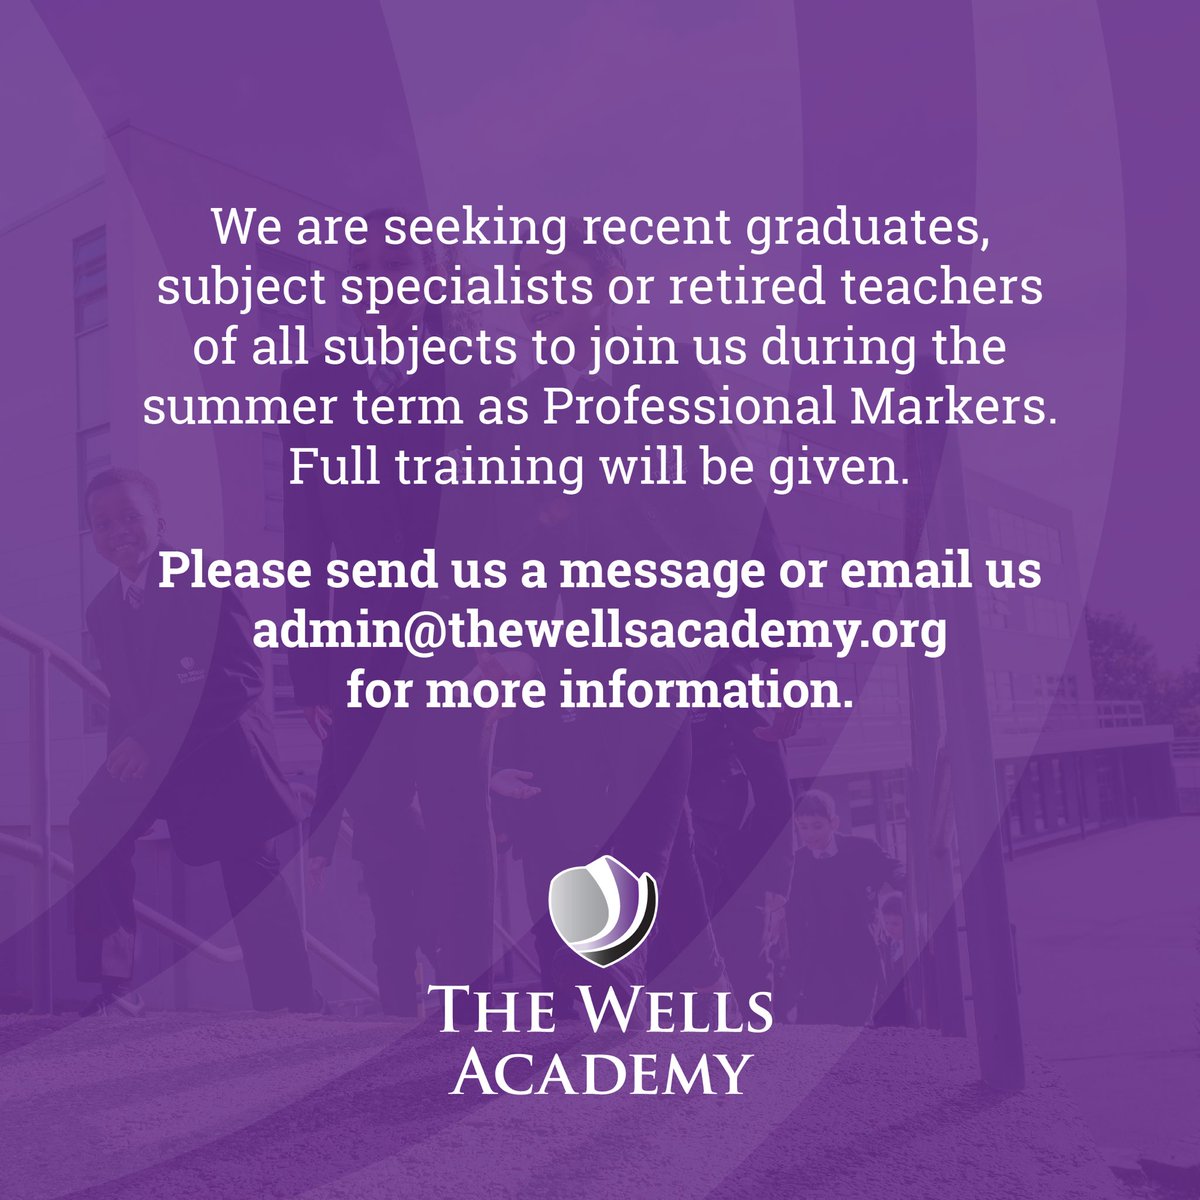 Calling students, graduates or retired teachers of English and History!

Come and join our pool of markers @TheWellsAcademy! 

We offer full training and great rates of pay. Get in touch for more info. 

#StudentJobs #NottinghamJobs